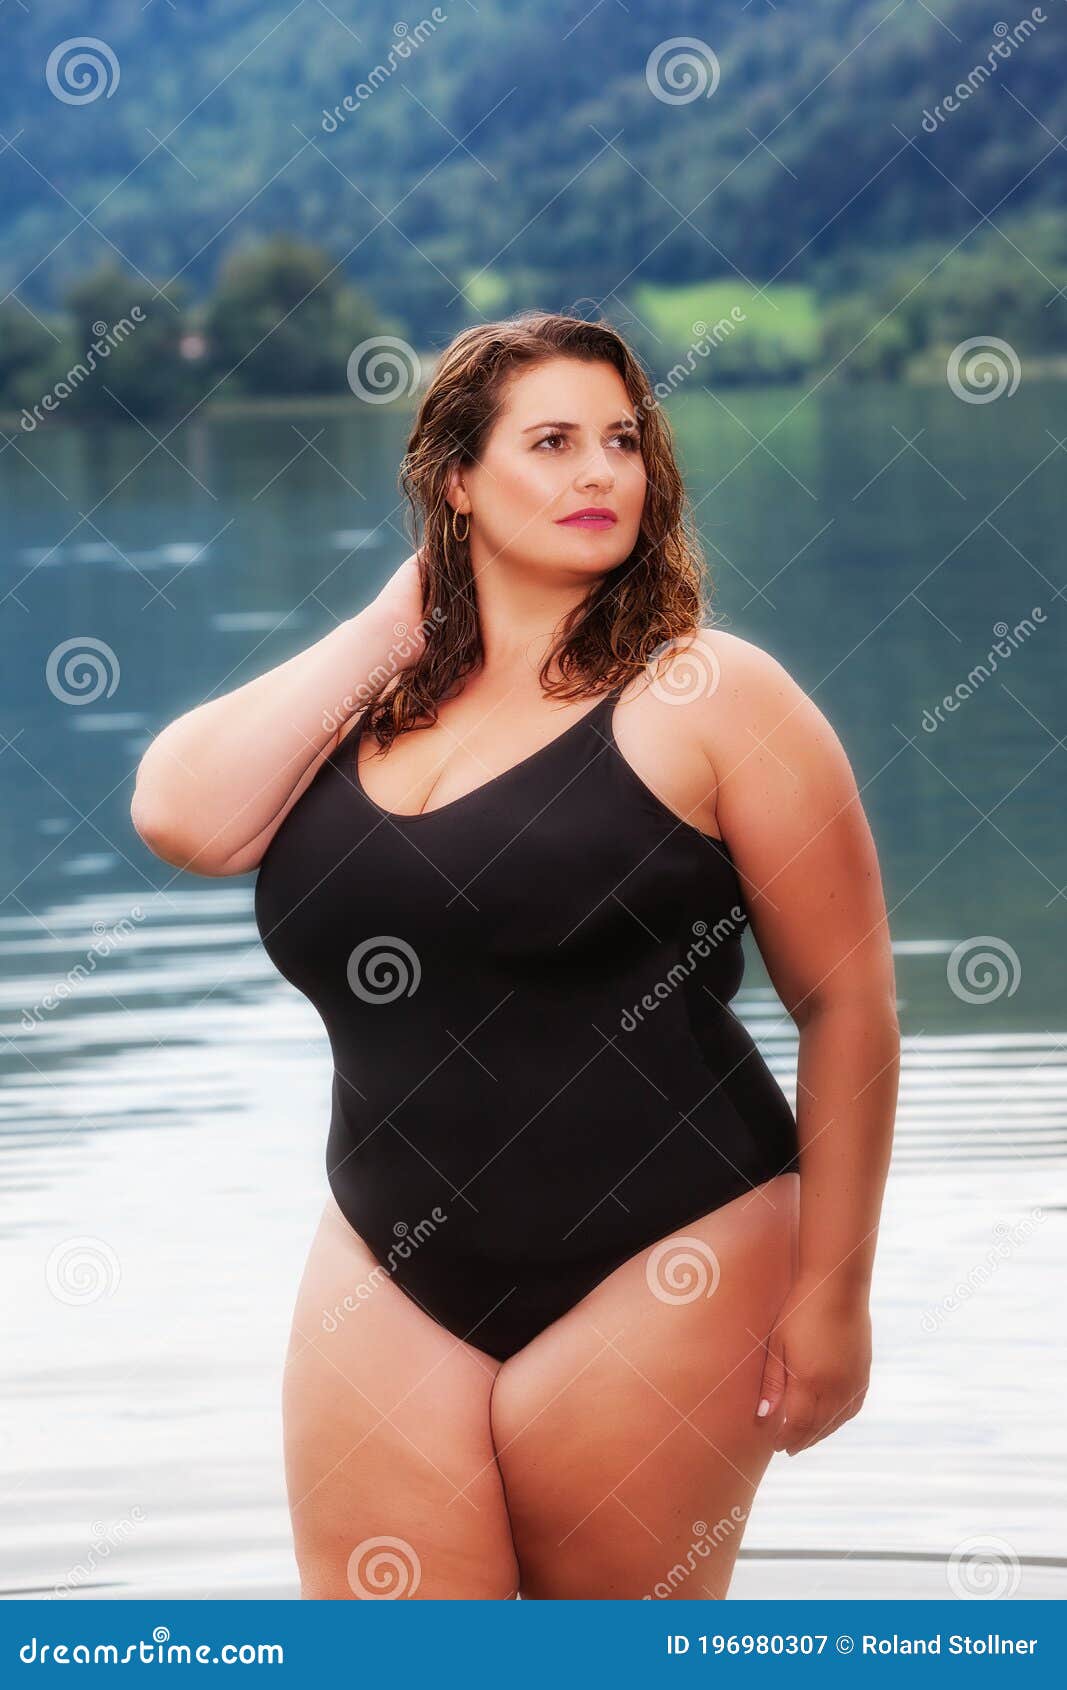 plus size models, busty, bbw, sexy, boobs Pin for Sale by